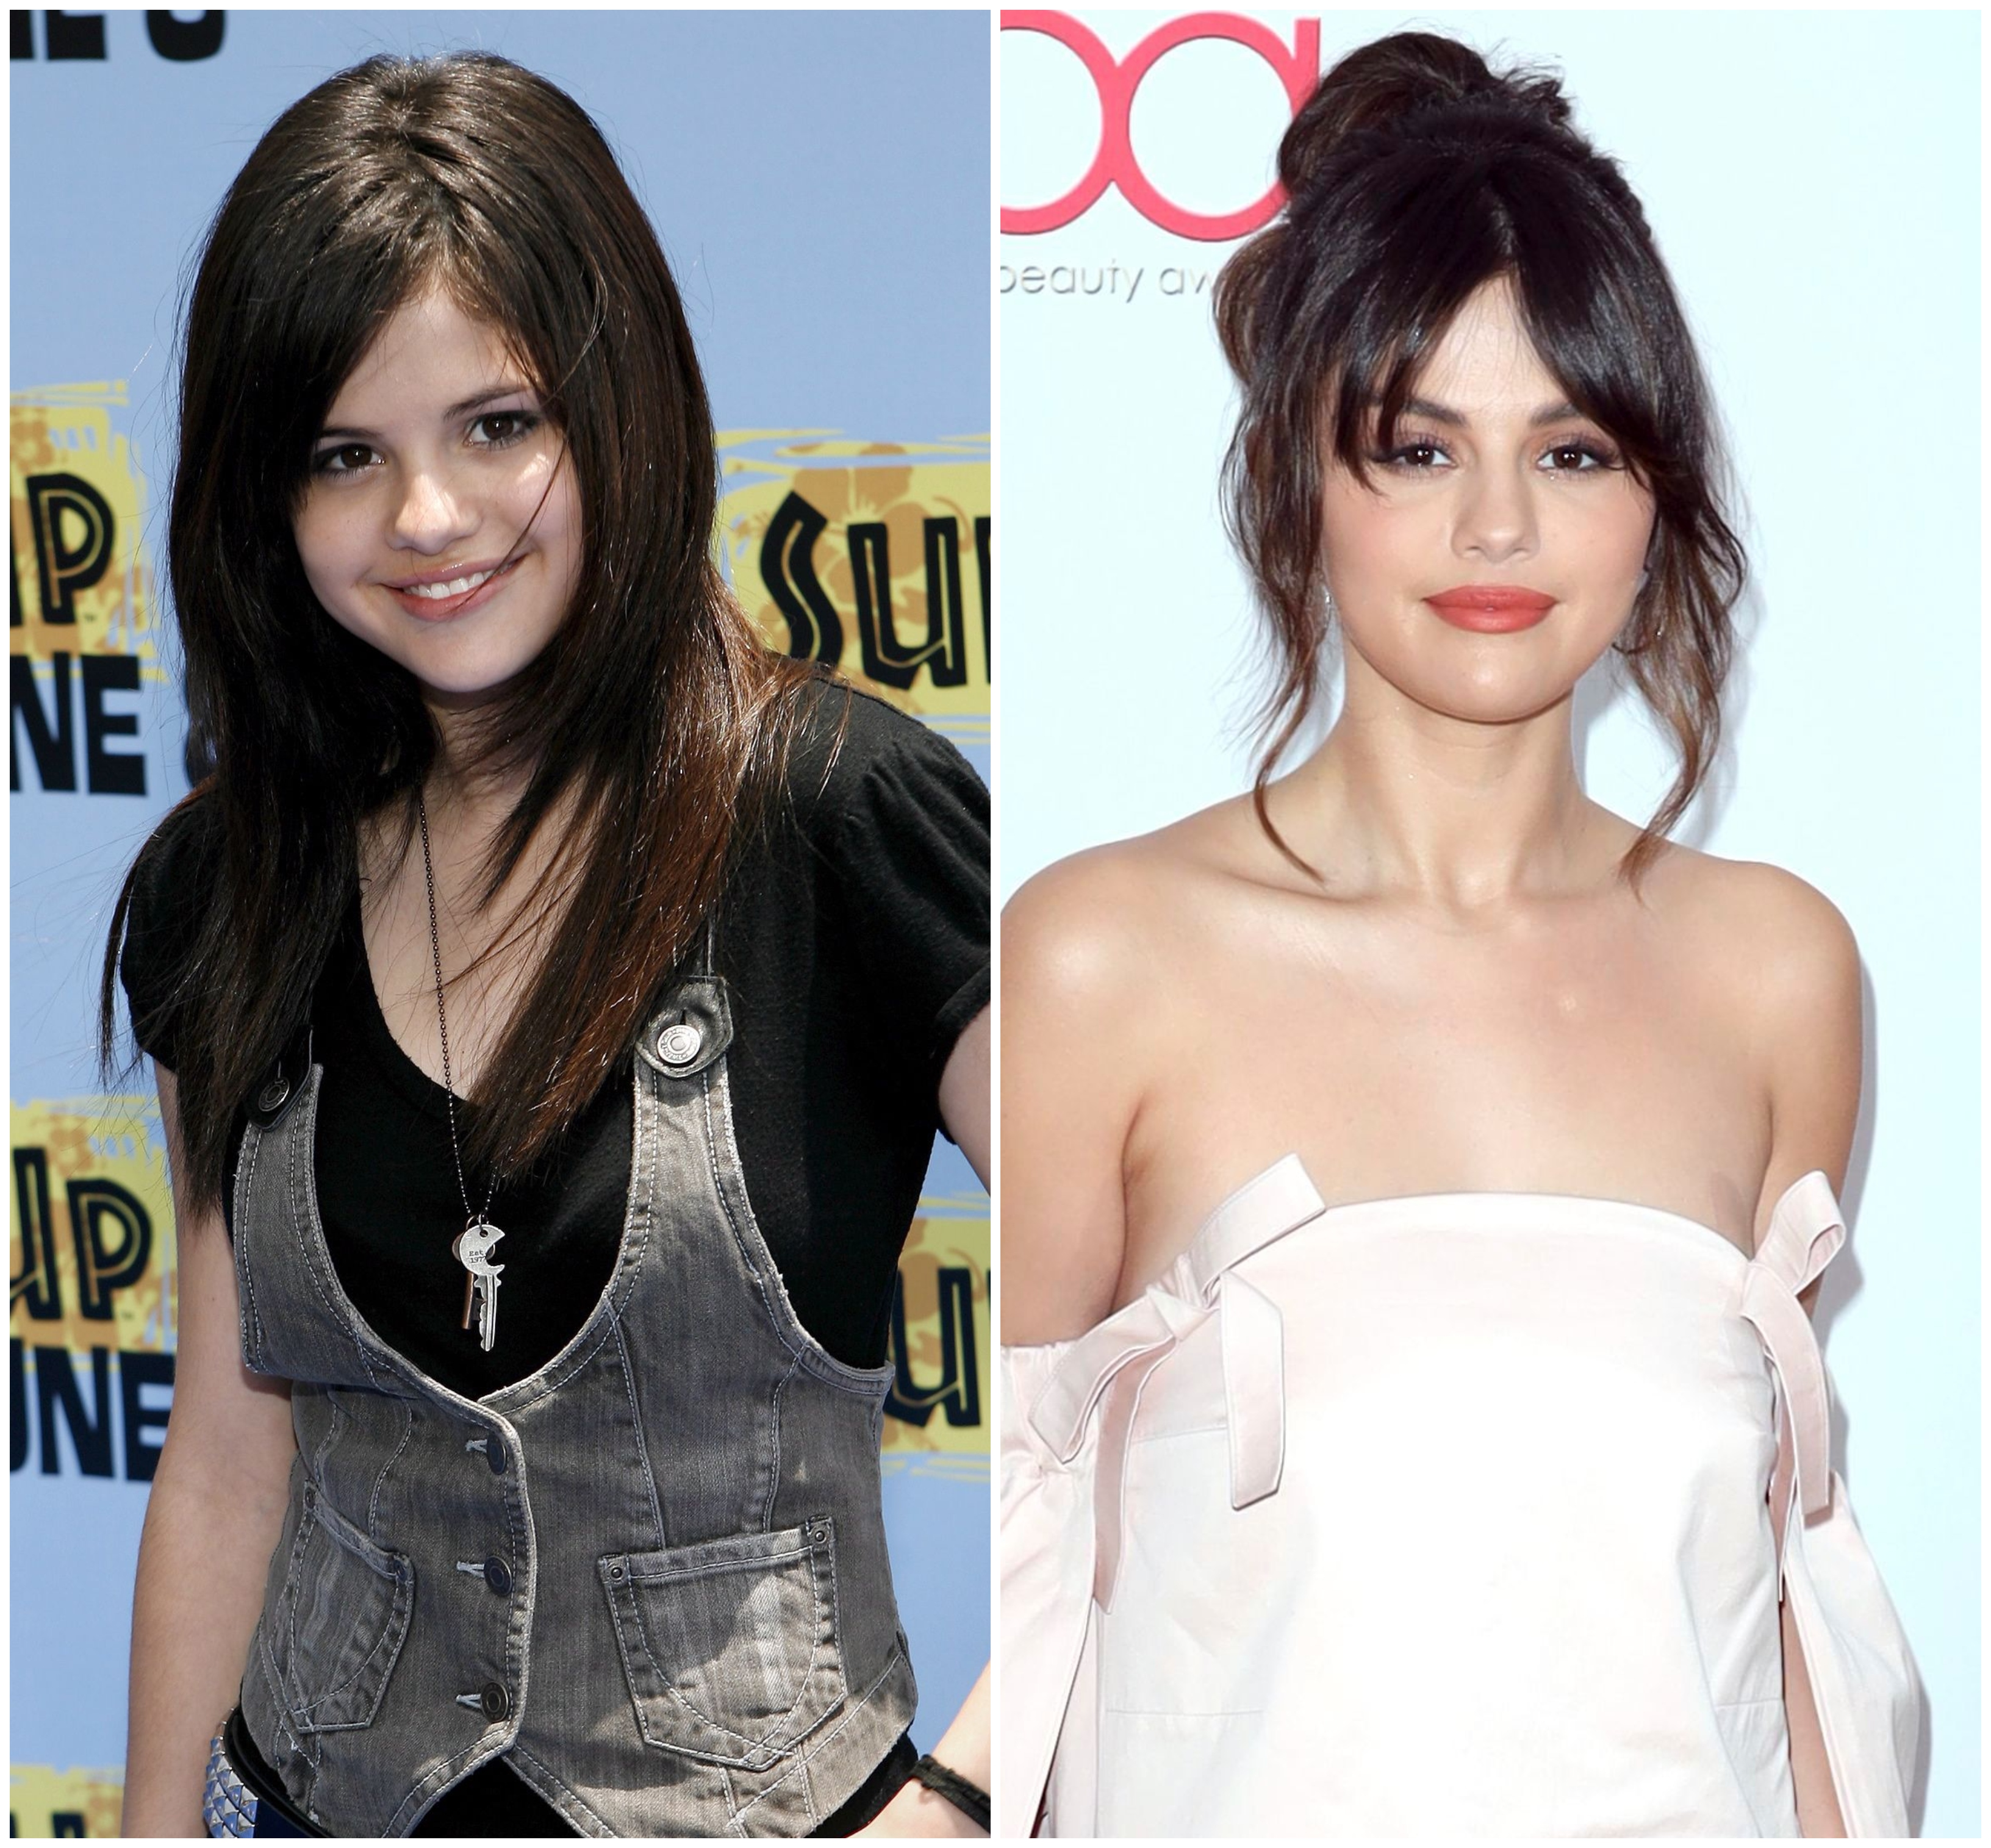 Real Celebrity Porn Selena Gomez - Selena Gomez Transformation: Photos of Her Then and Now